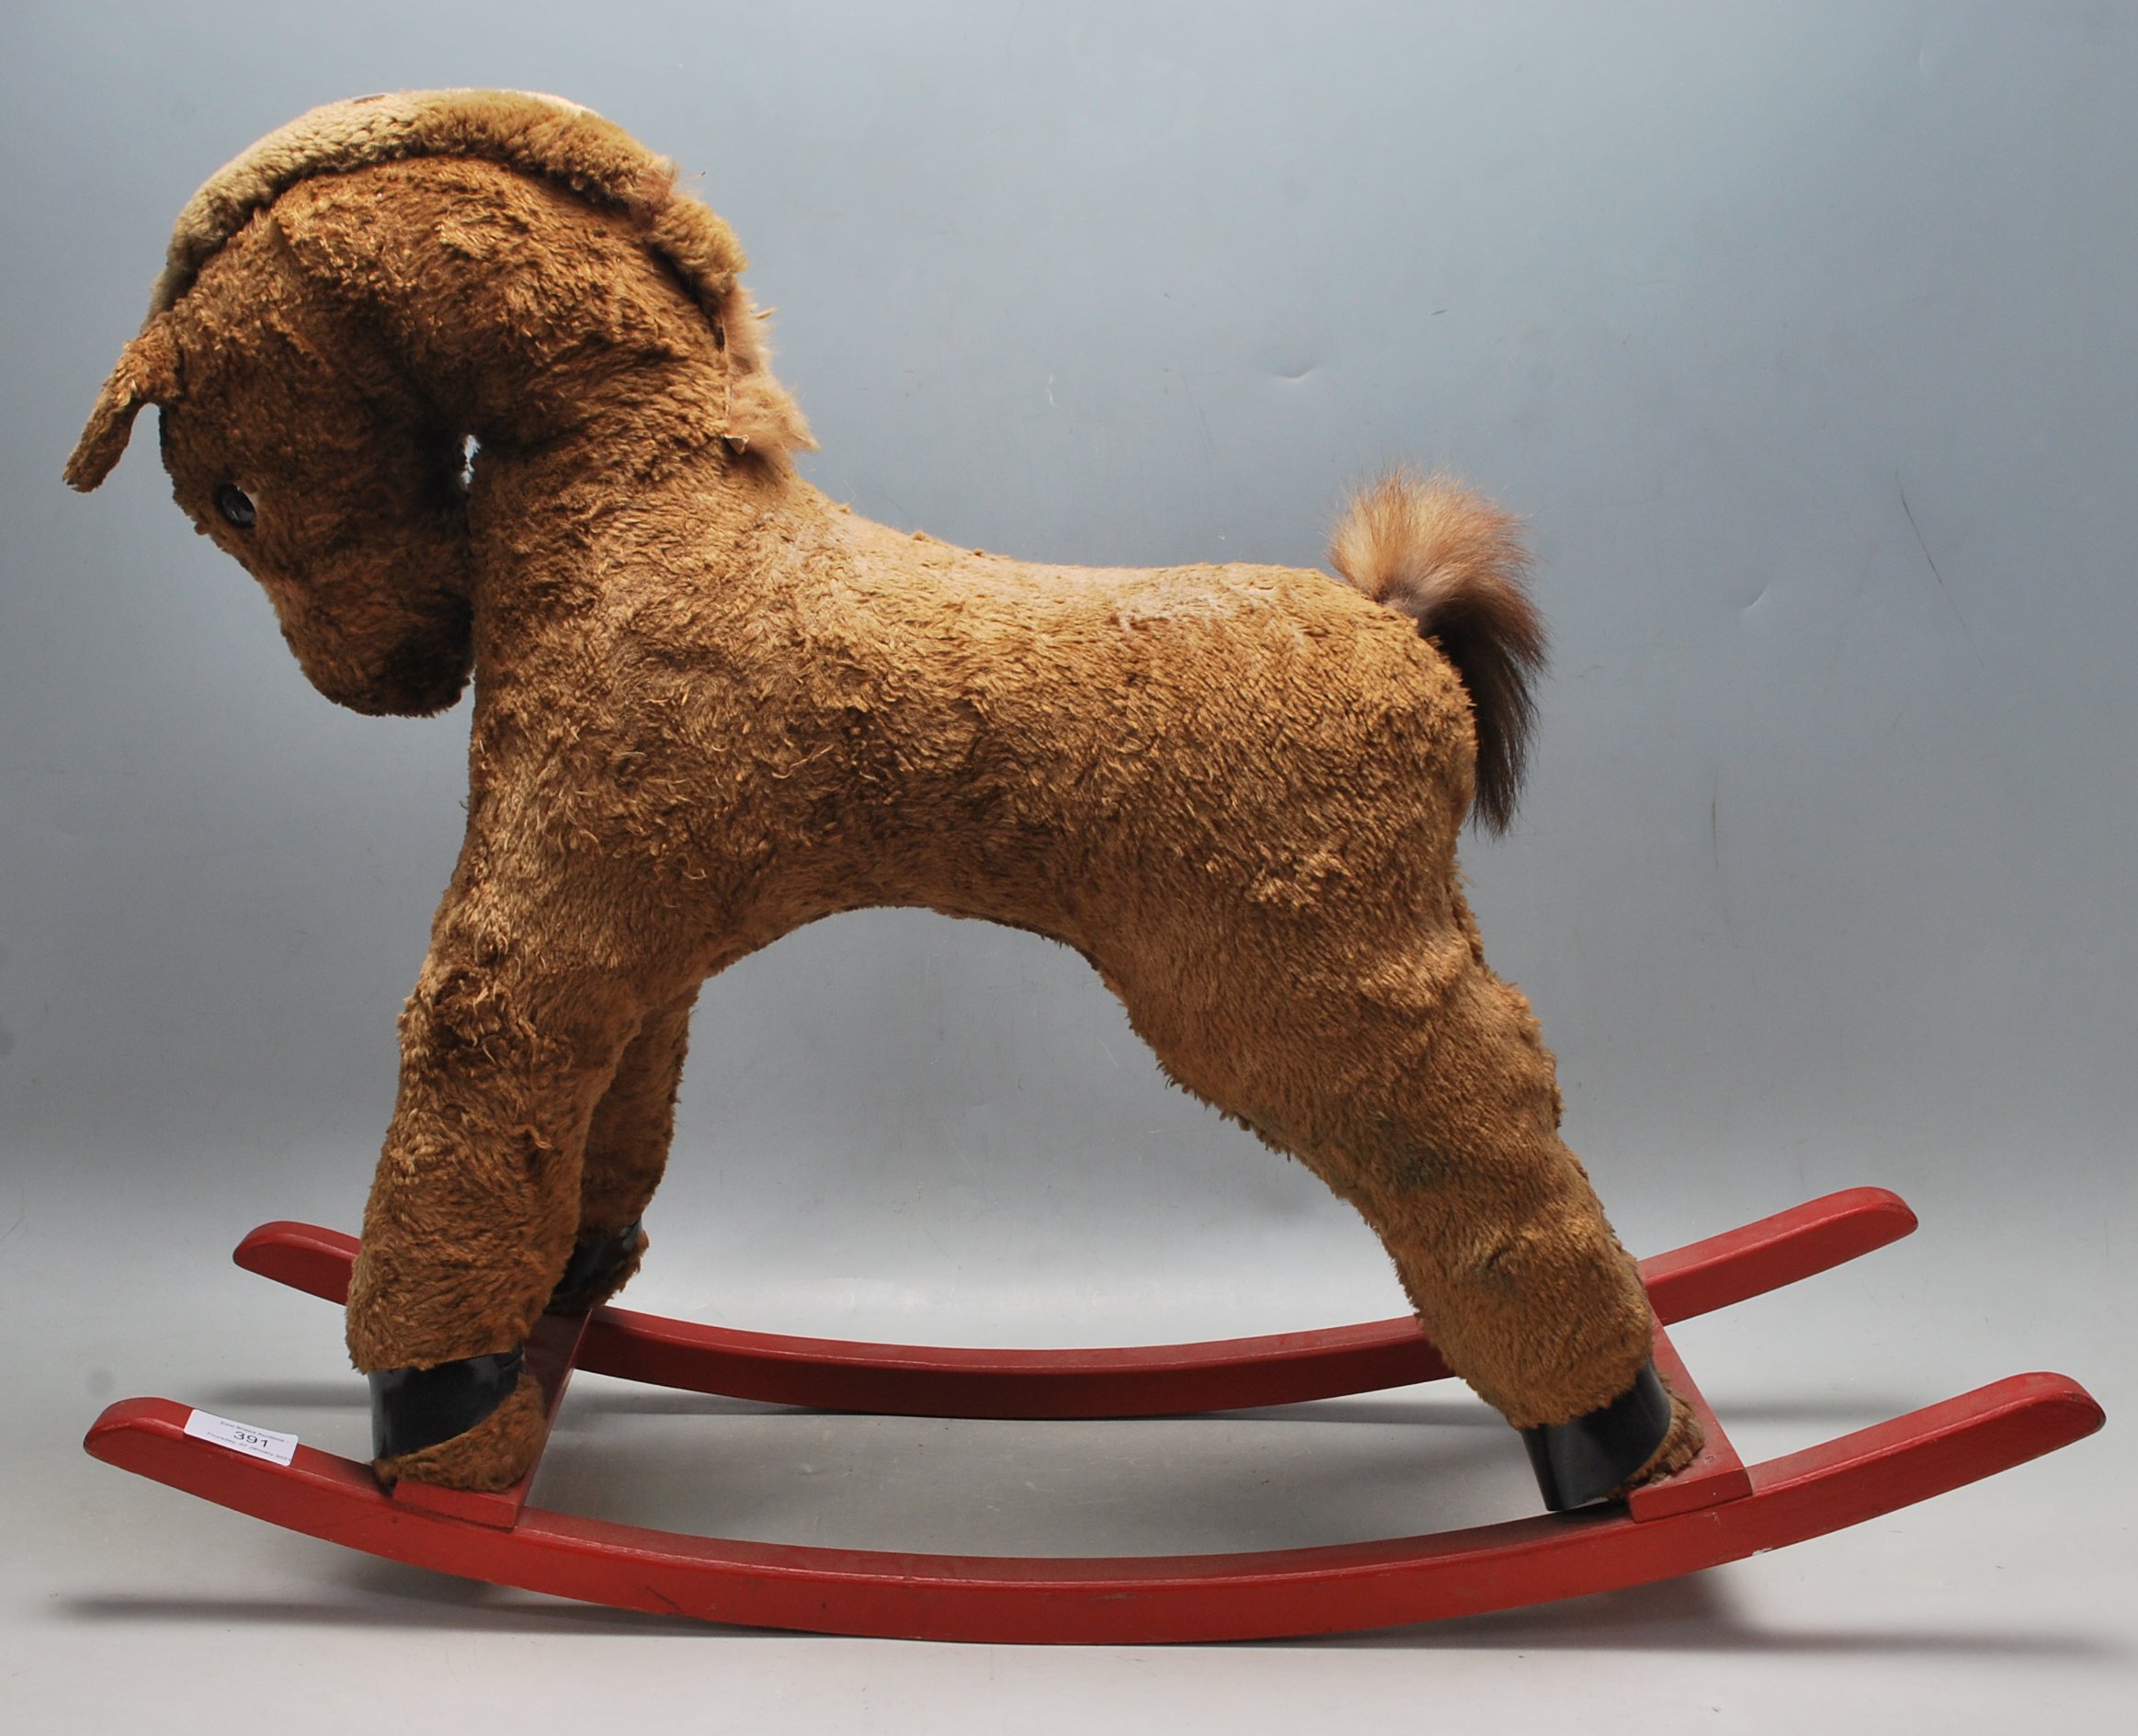 LATE 20TH CENTURY VINTAGE CHILDRENS ROCKING HORSE